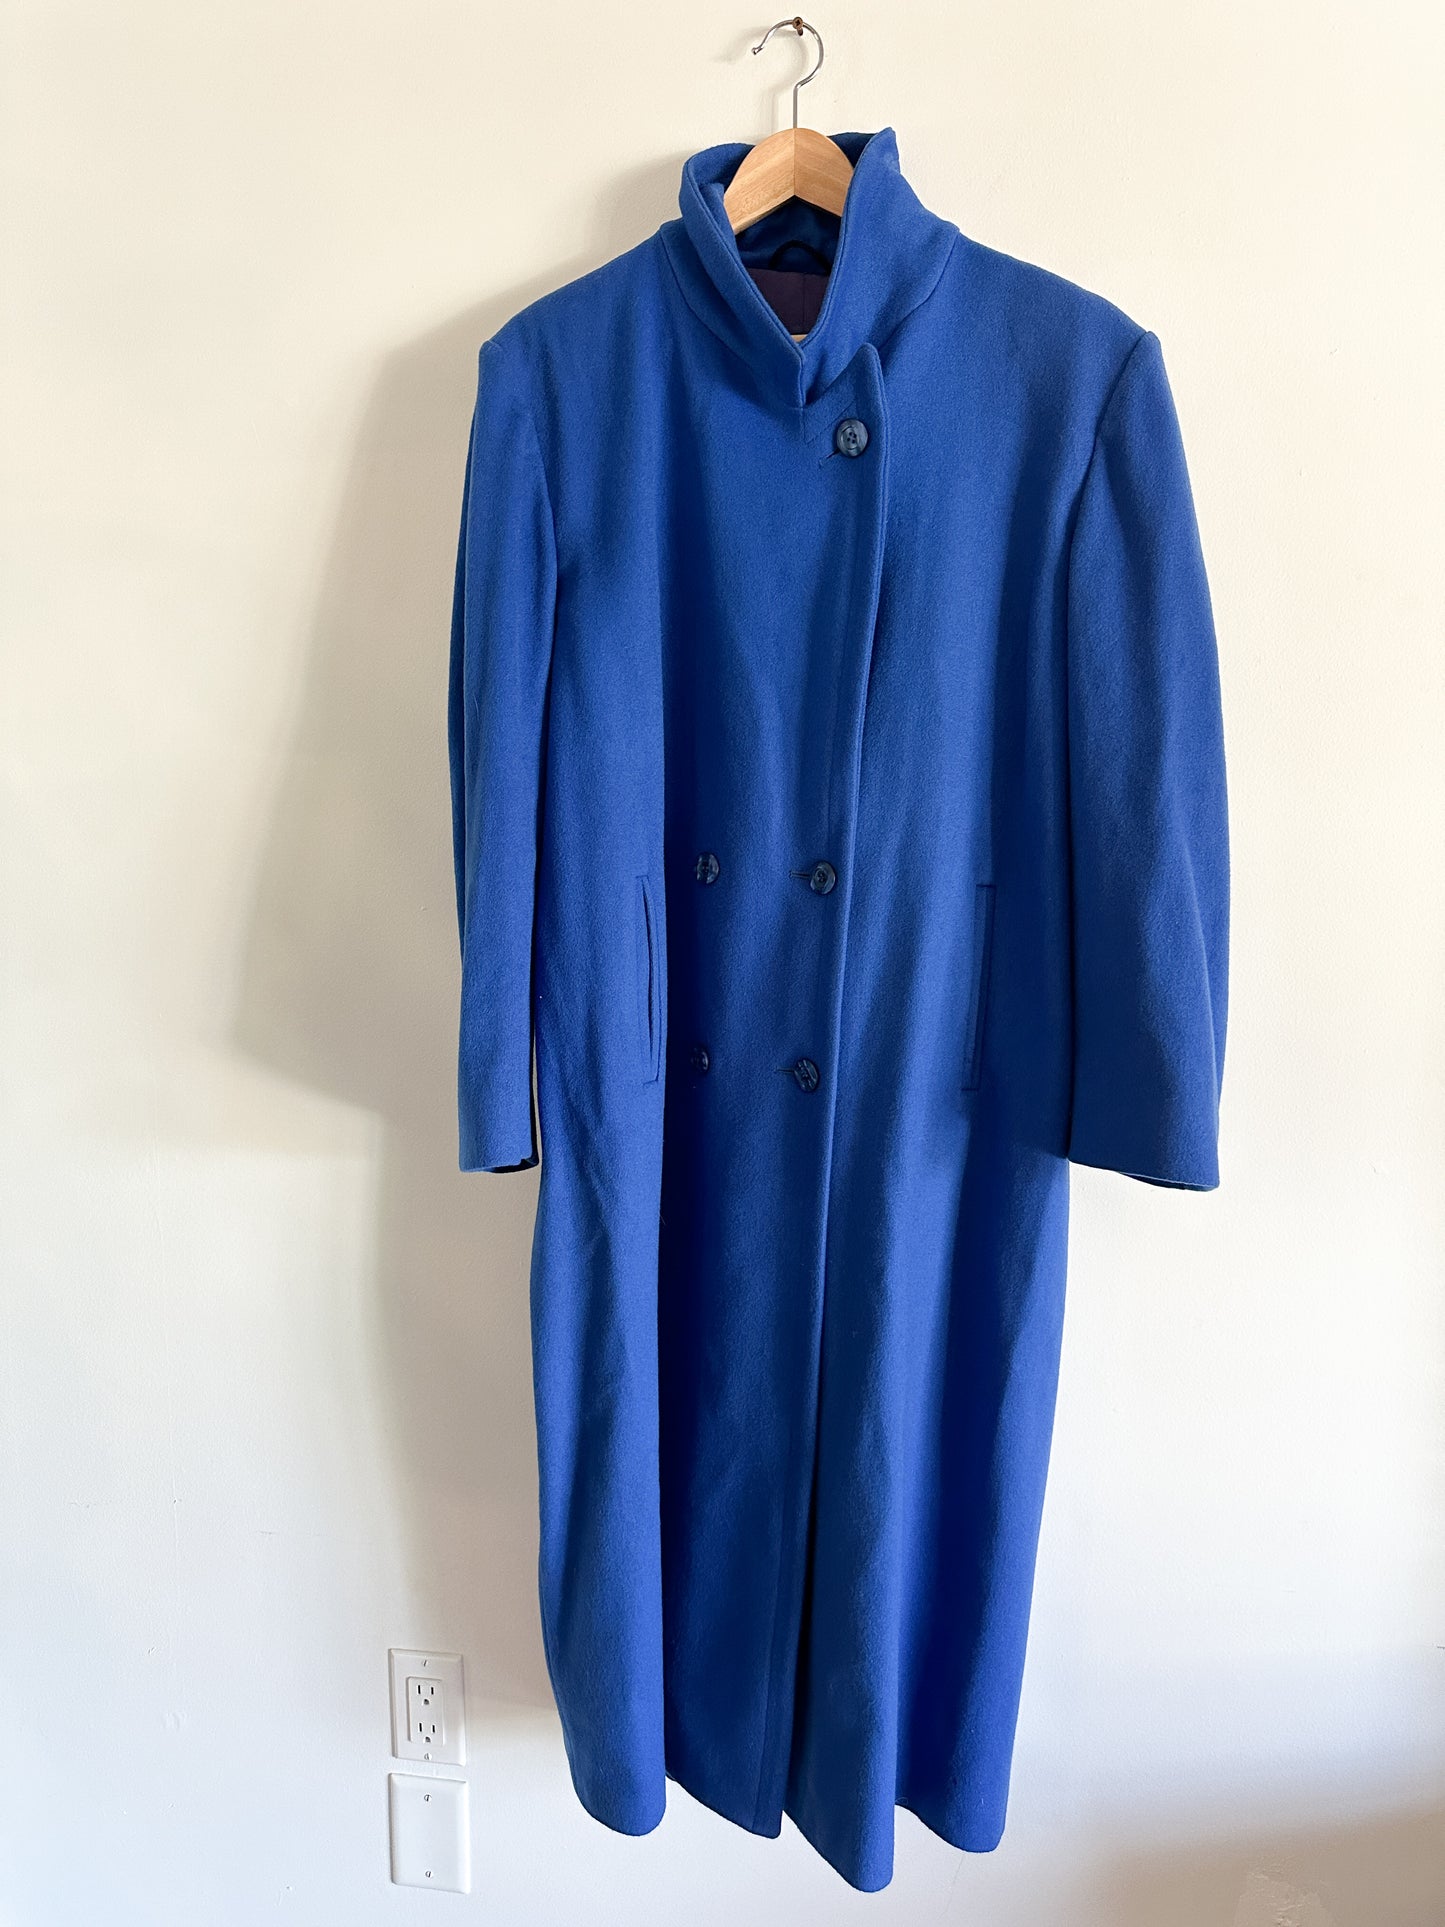 Royal Blue London Fog Wool Double Breasted Coat| Full Length , fully lined double breasted coat Size:18-M